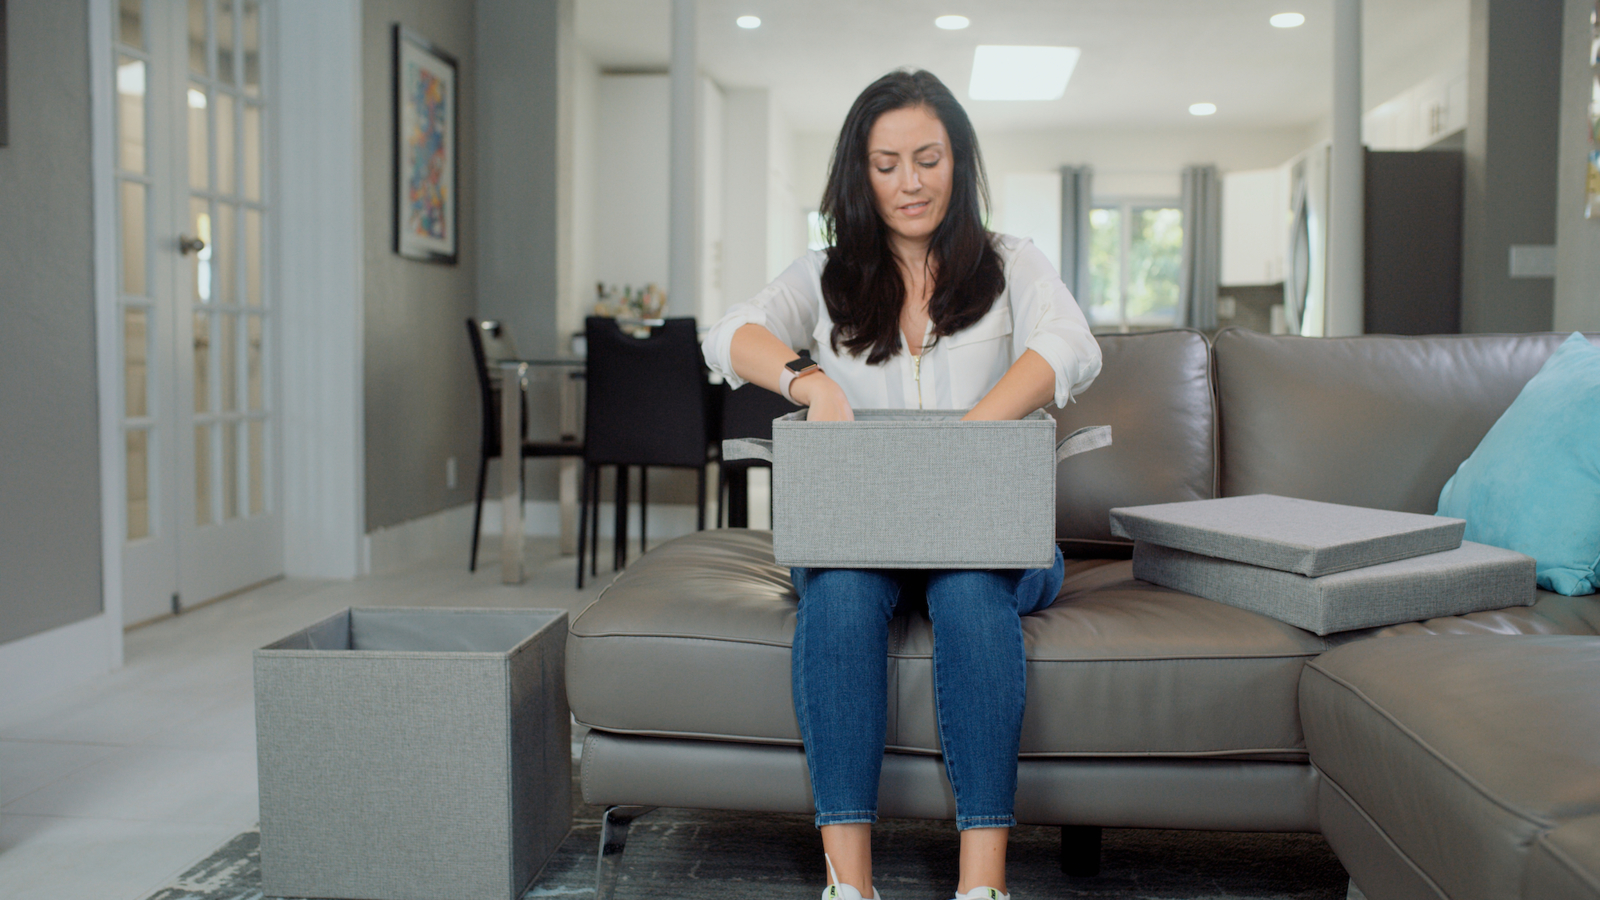 Woman with long black hair wearing a white top and blue jeans sitting on a gray leather couch going through a box